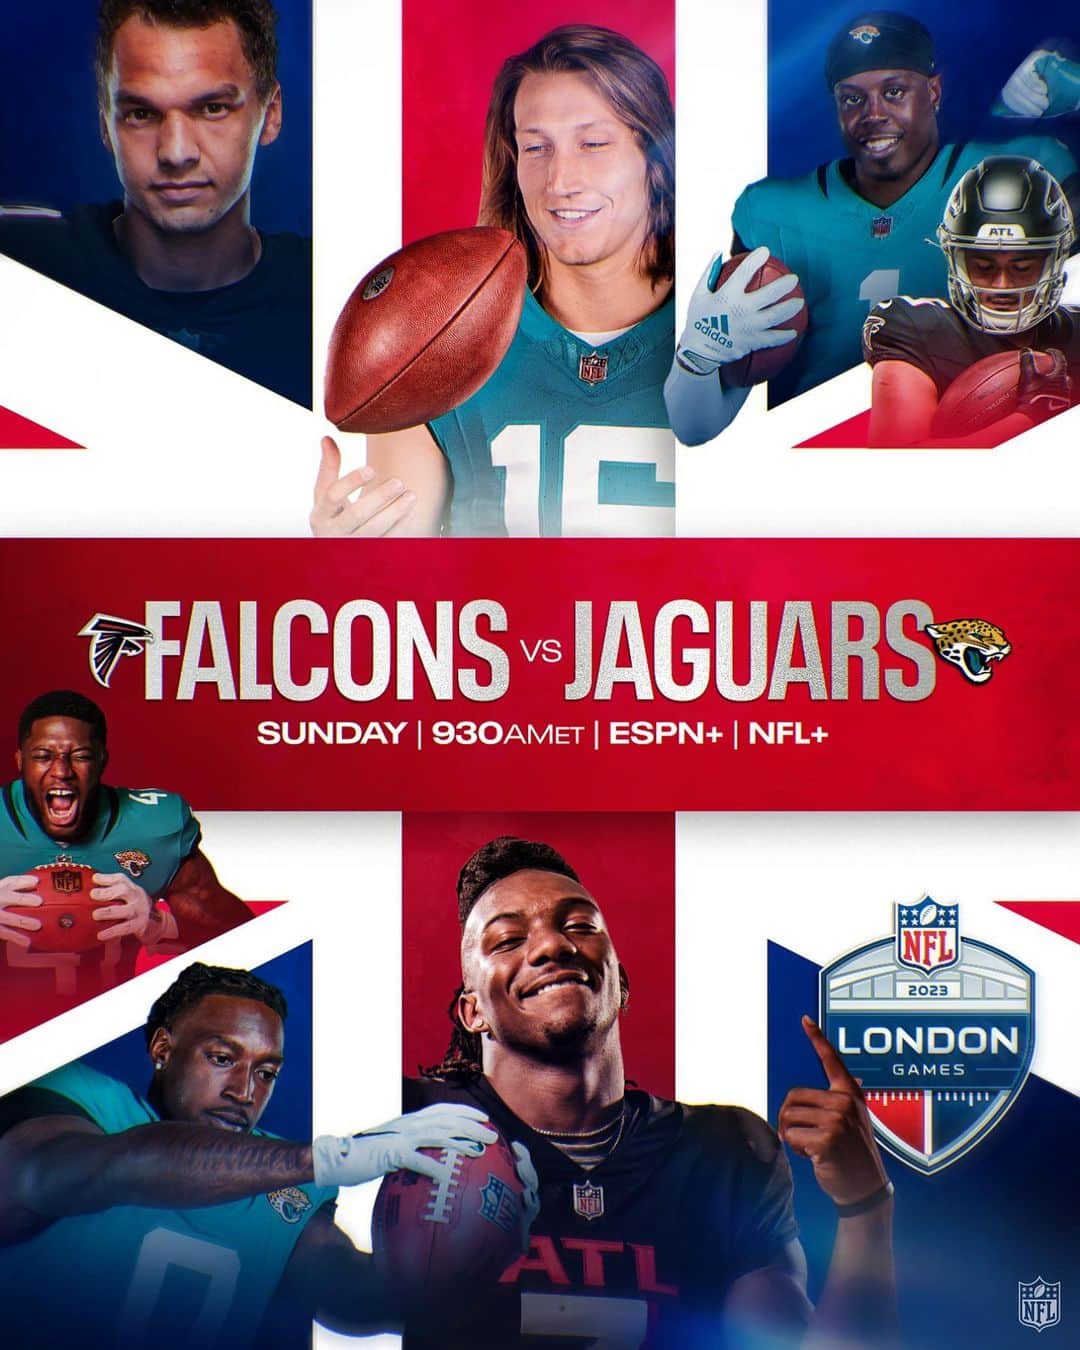 NFLのインスタグラム：「London baby 🇬🇧 #NFLLondonGames @NFLUK  #ATLvsJAX -- Sunday 9:30am ET on ESPN+ Also available on #NFLPlus」